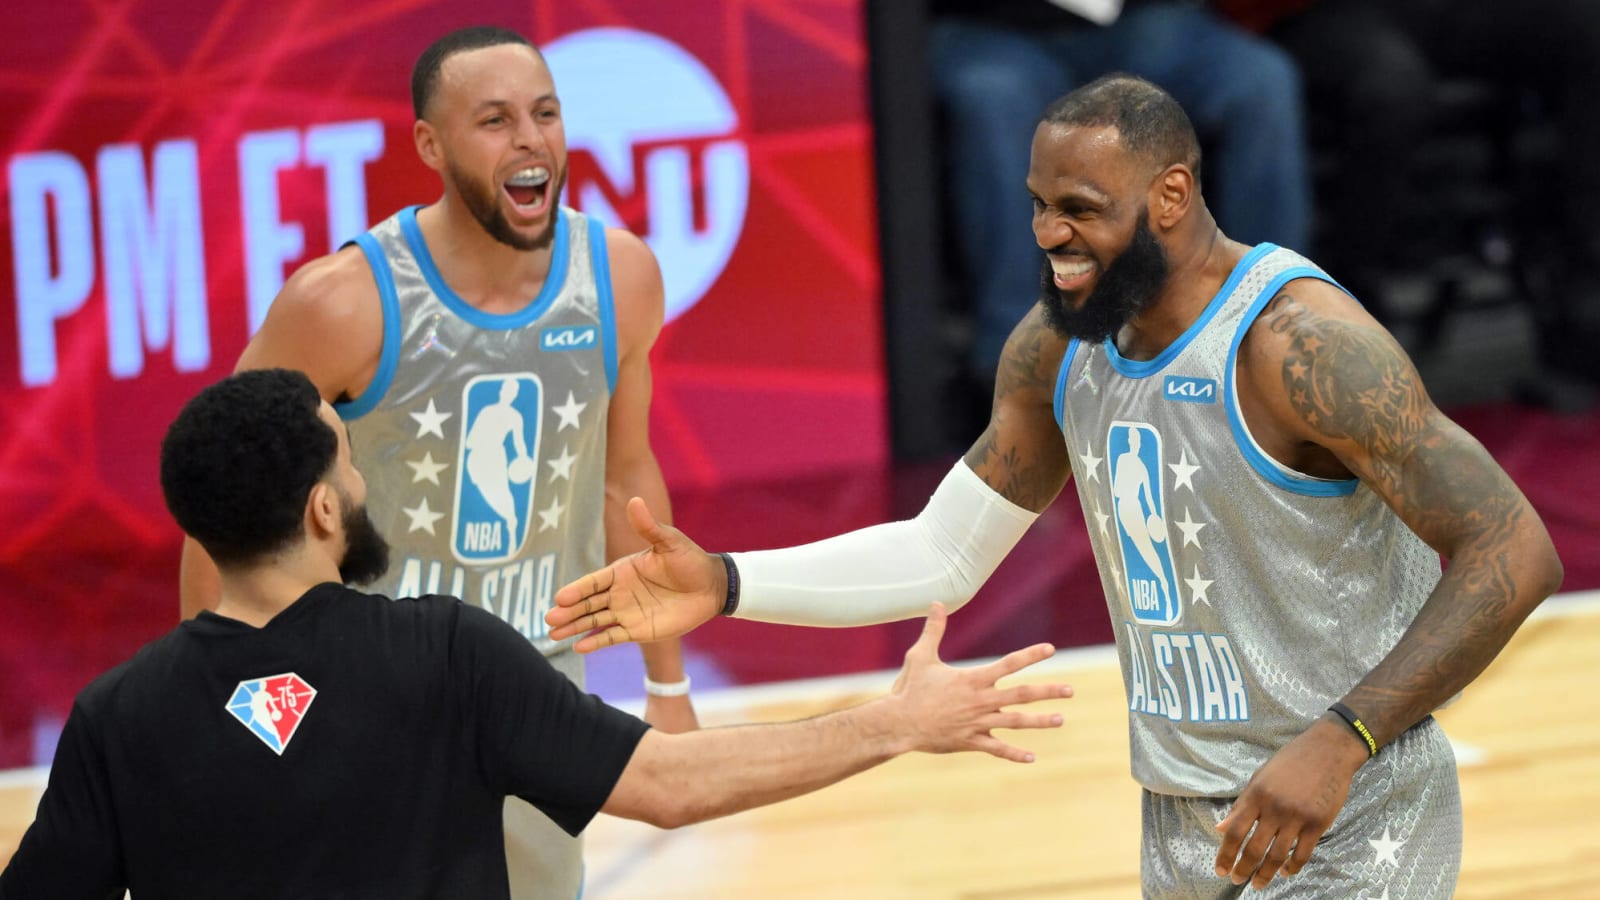 LeBron James reveals he'd love to play with Stephen Curry